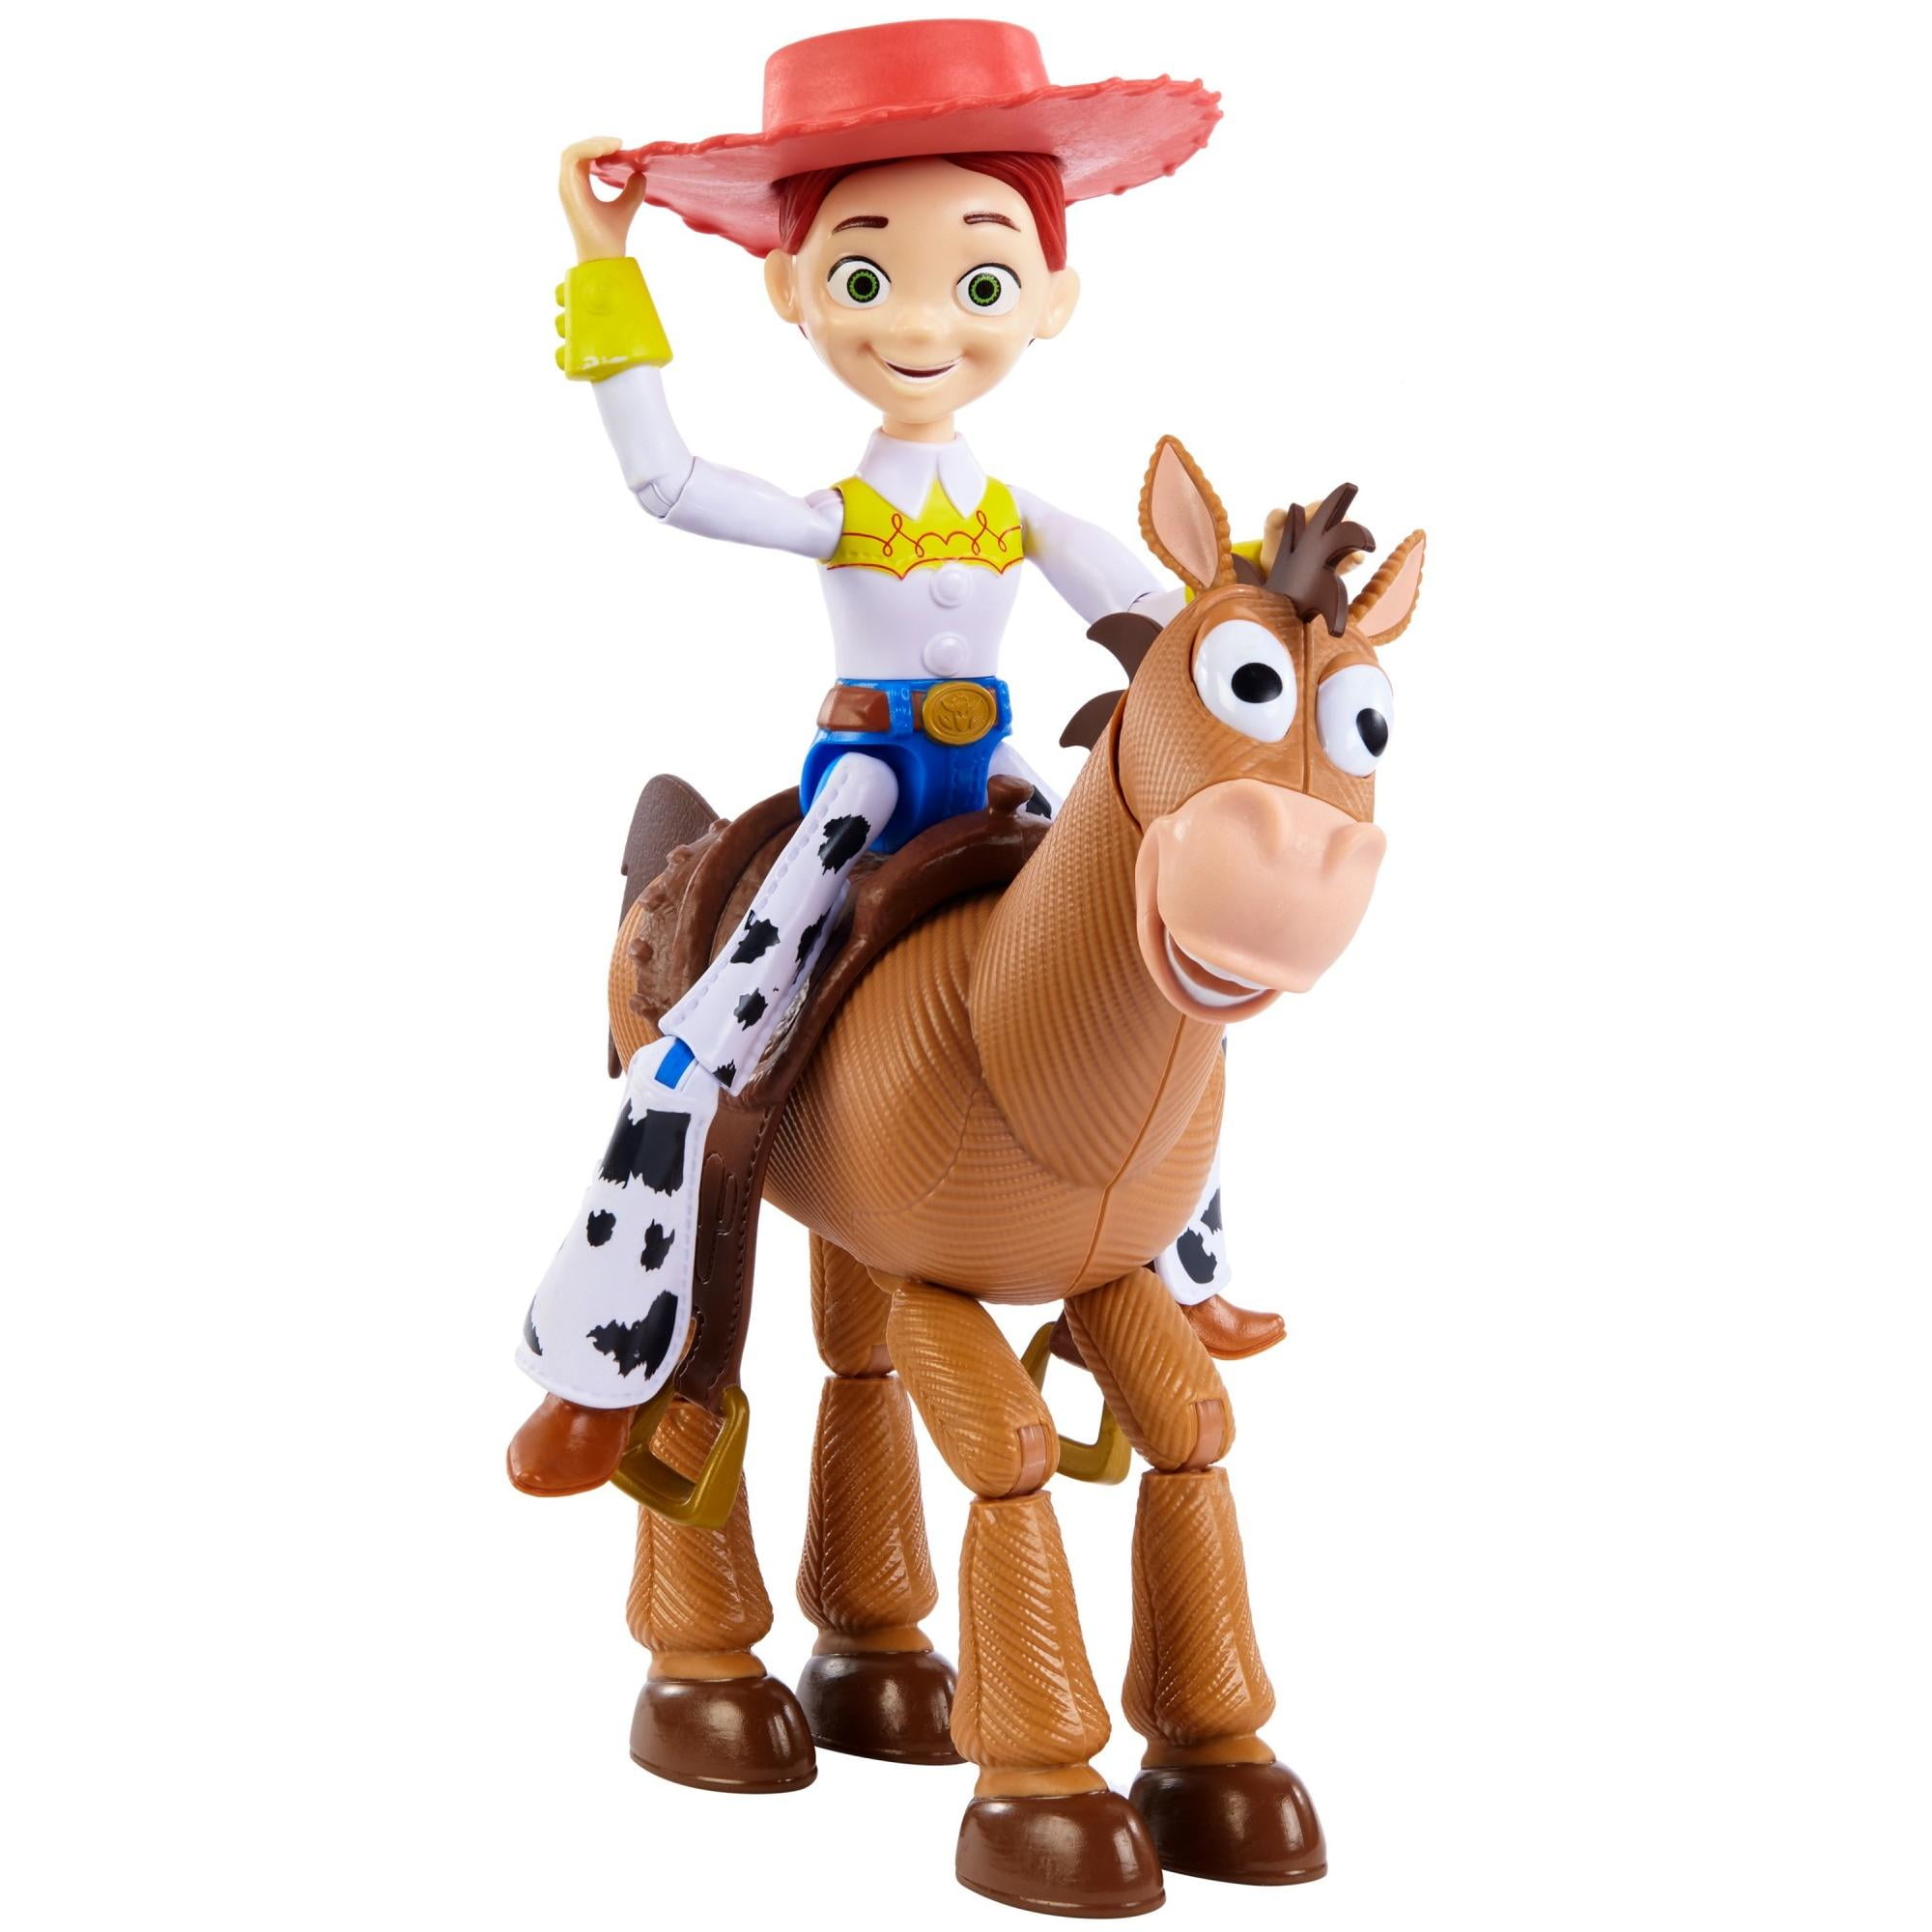 jessie's horse from toy story